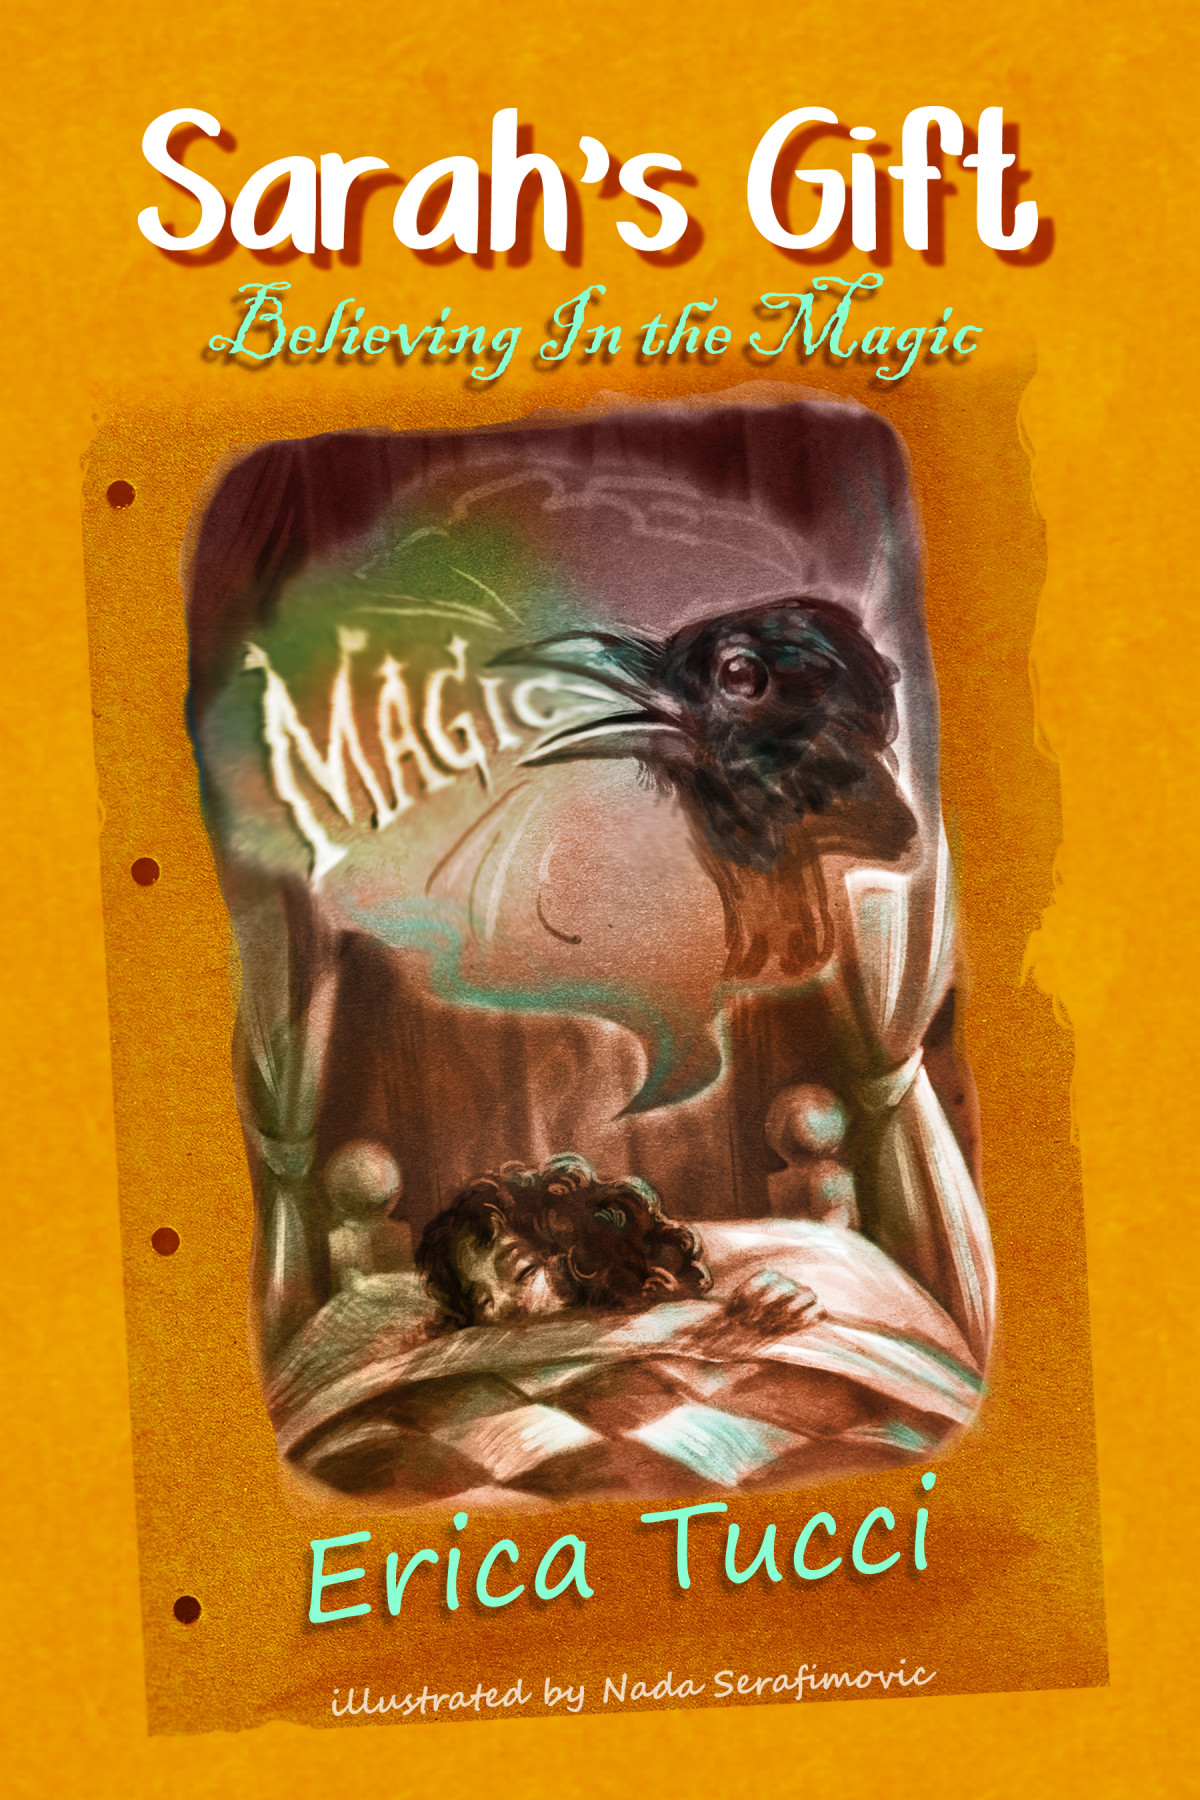 Believing In the Magic, 2nd book of Sarah's Gift